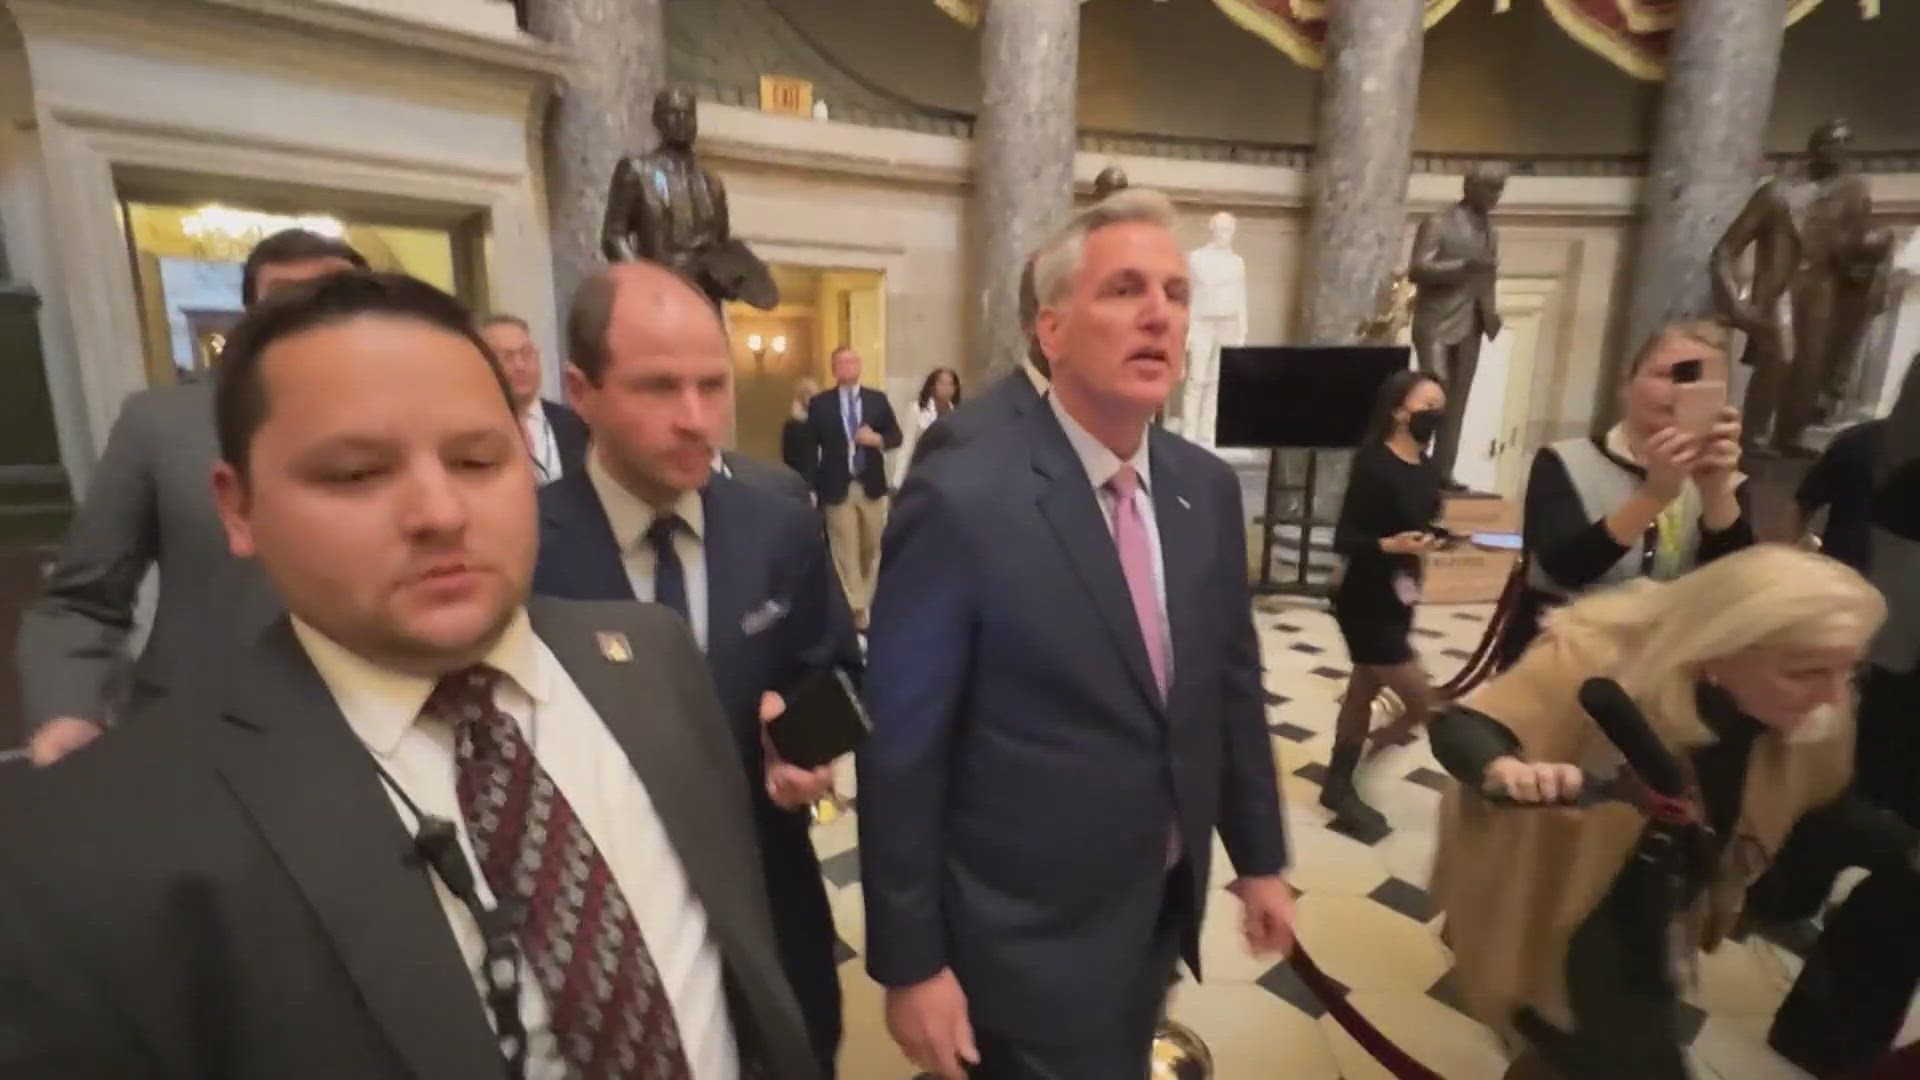 In a historic move, Speaker of the House Kevin McCarthy was voted out of his position. A new Speaker is expected to be elected next Wednesday.